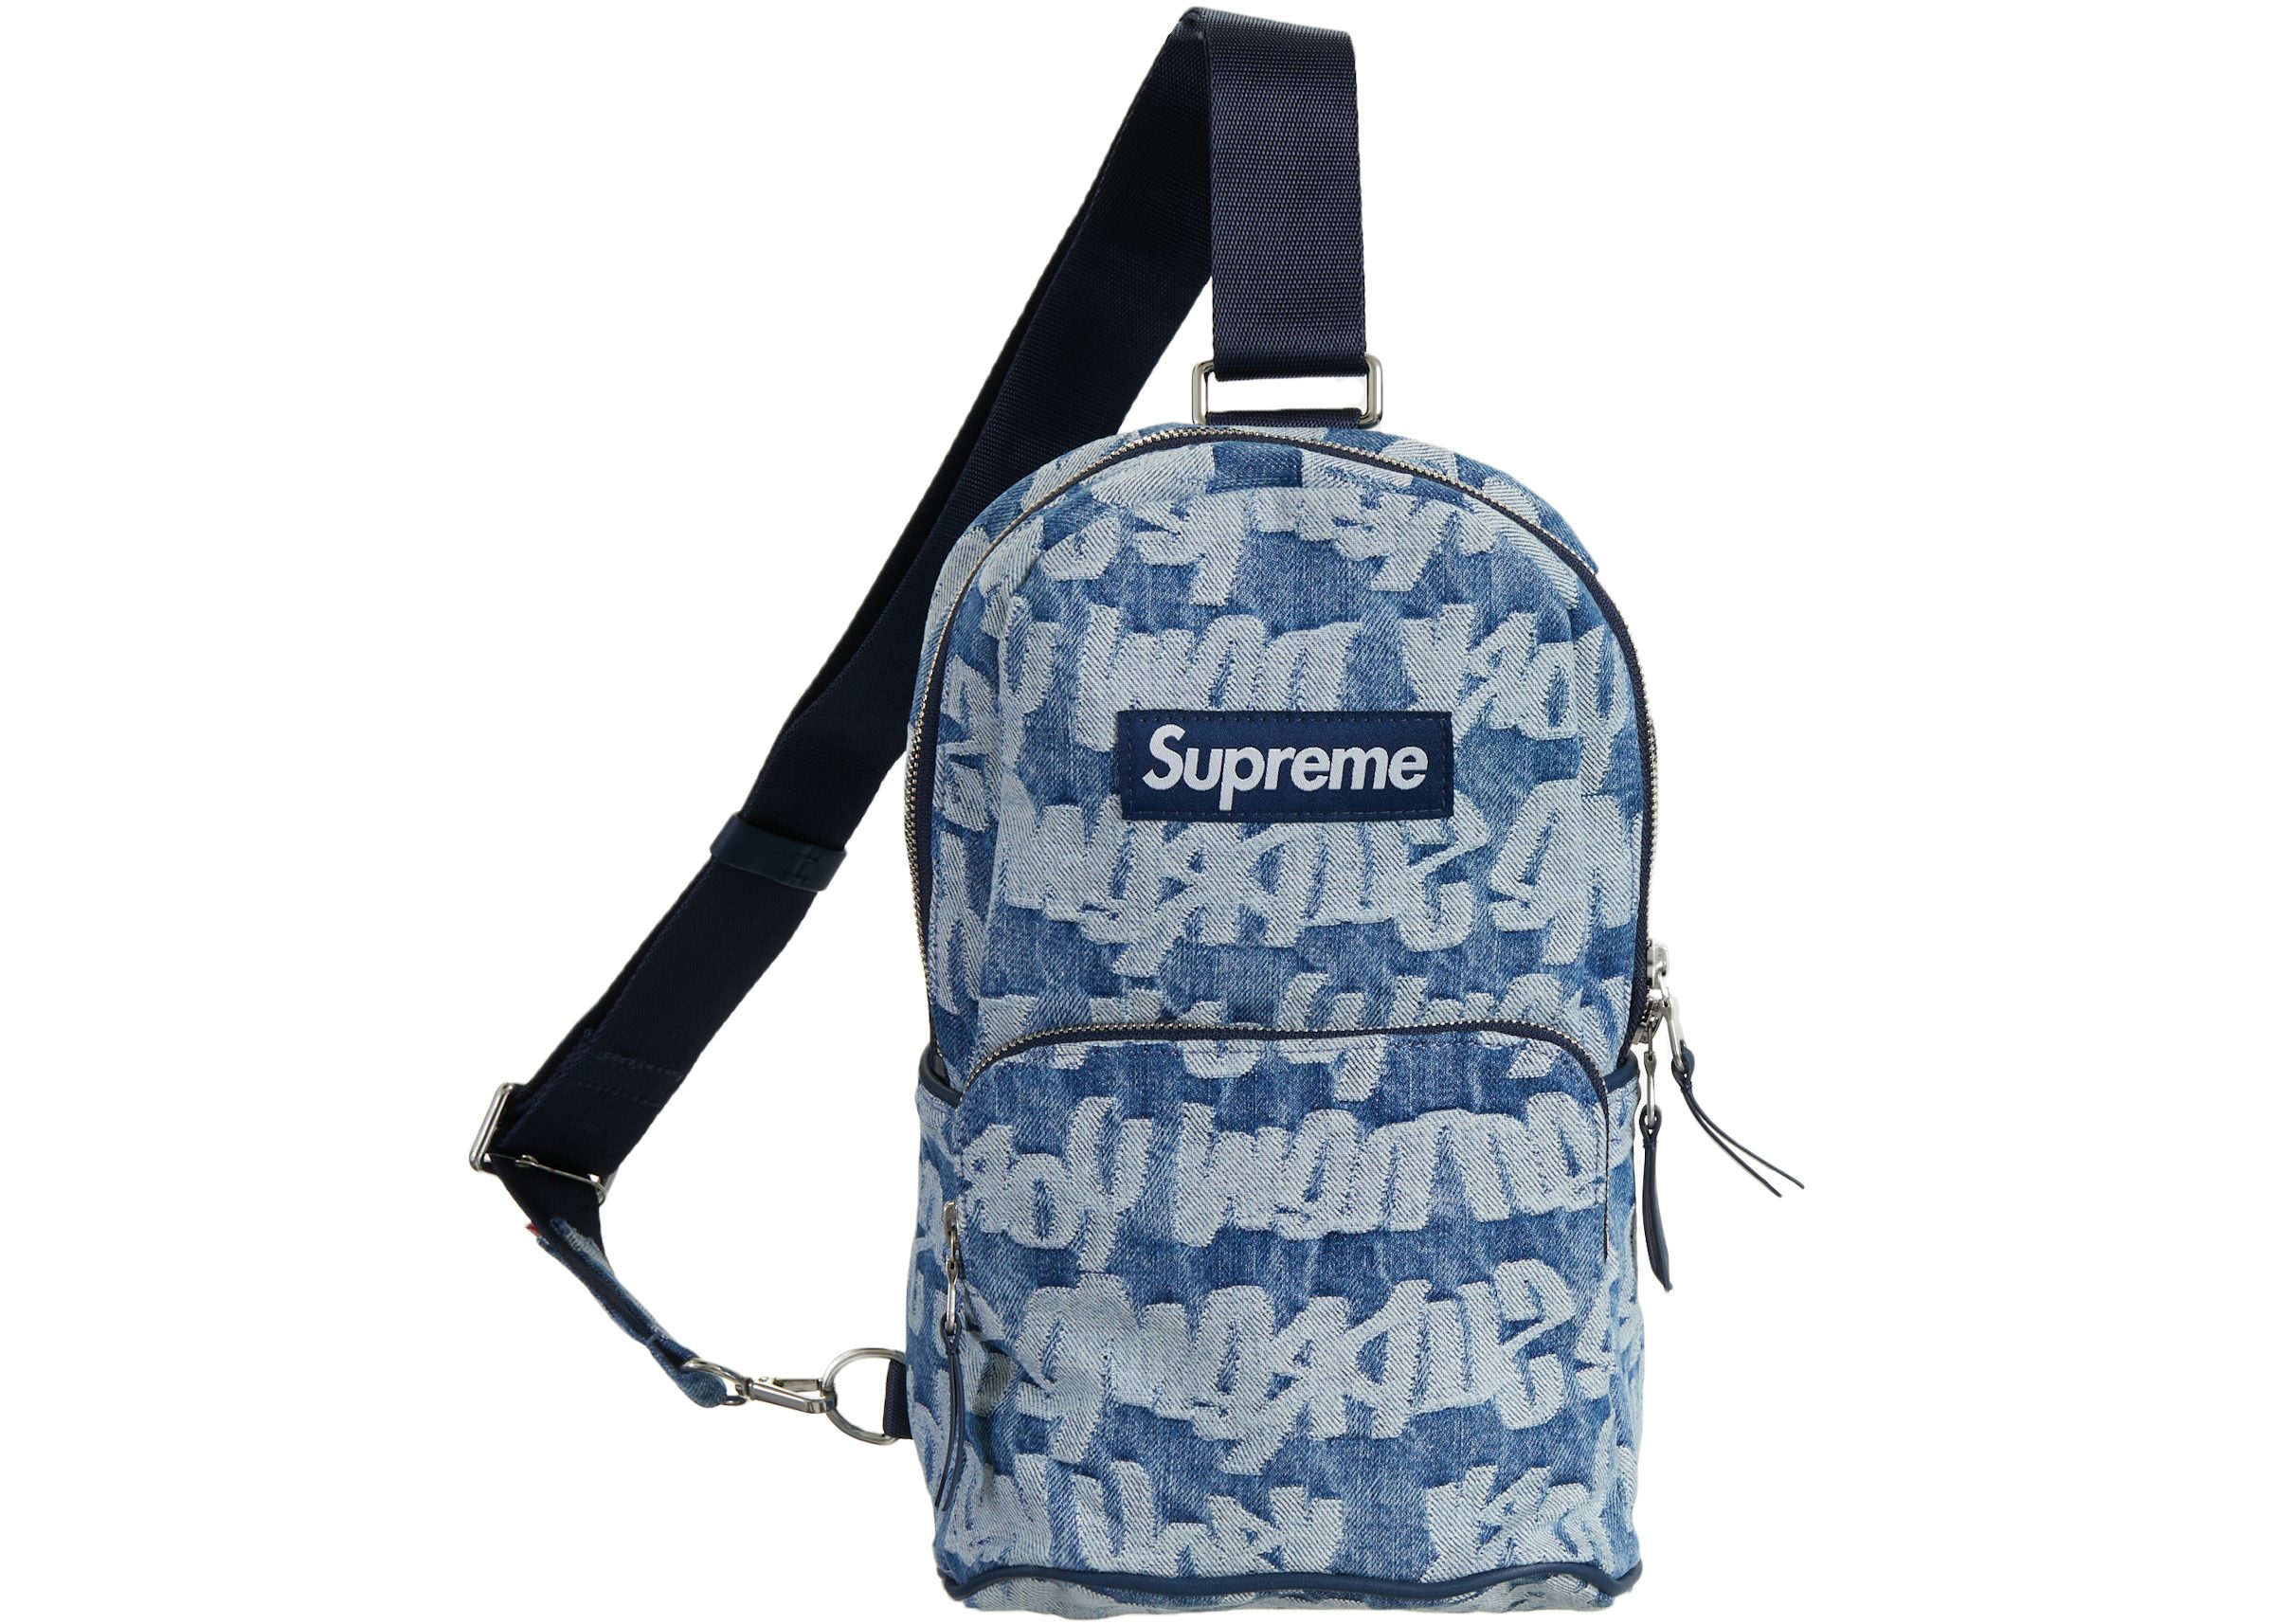 StockX Supreme Shopping Guide: Bags - StockX News